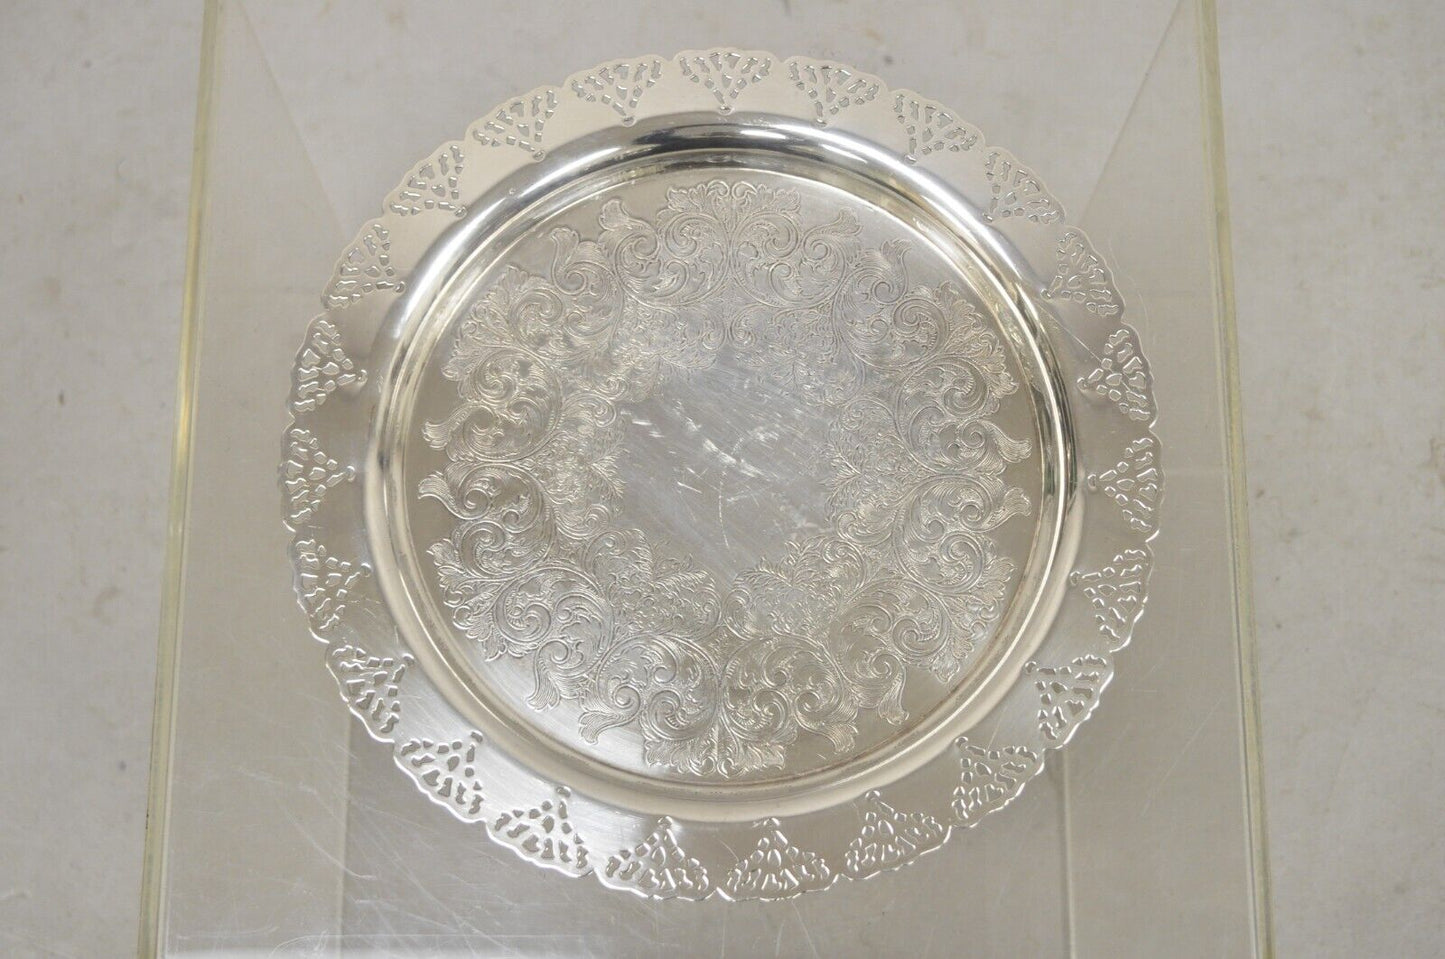 Vintage Home Decorators Inc Silver Plated Pierced Gallery Round Serving Tray